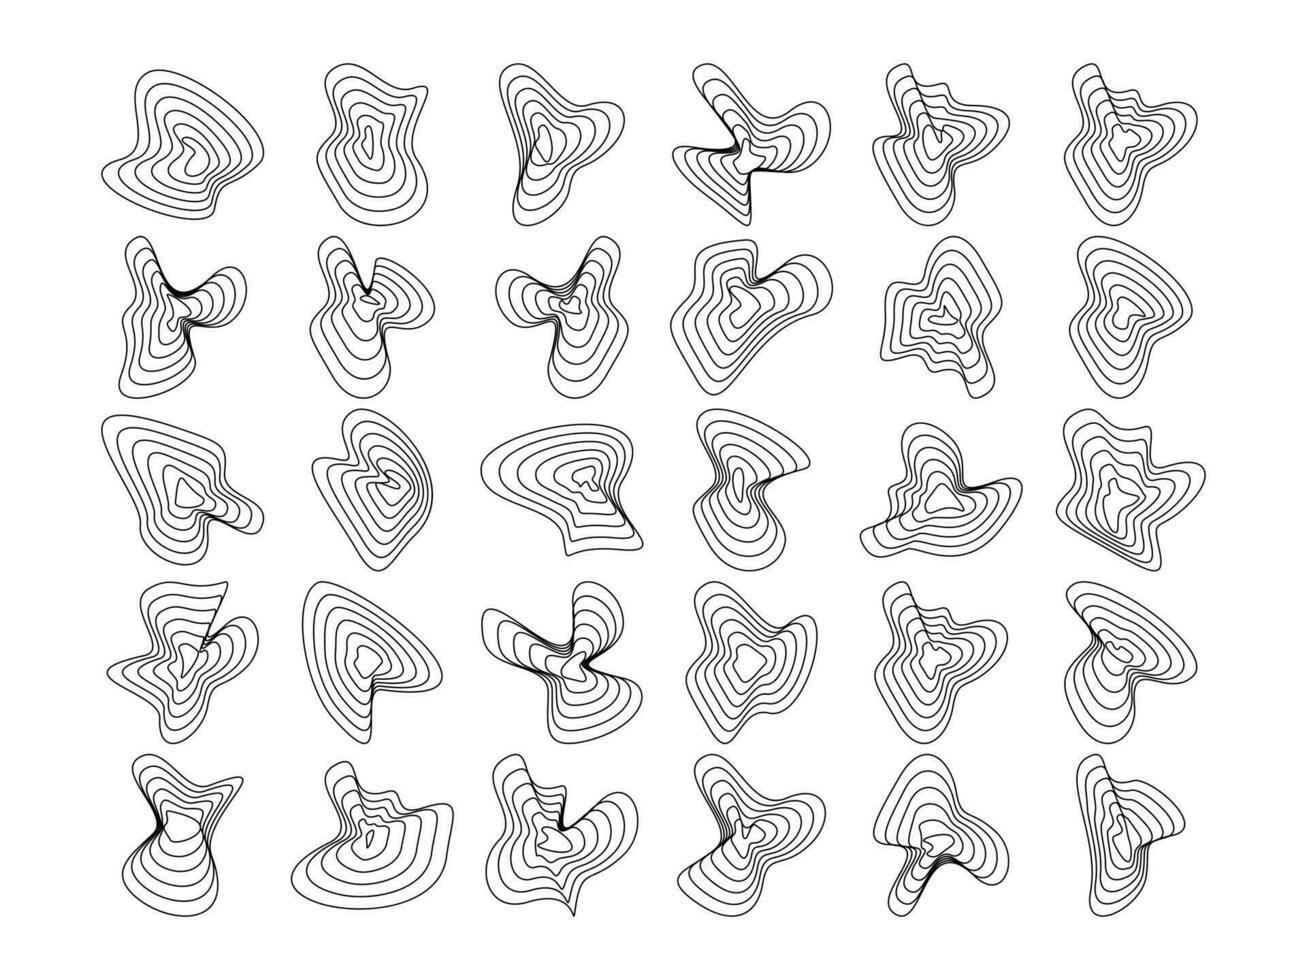 Wavy Abstract Concentric Line Art Collection vector